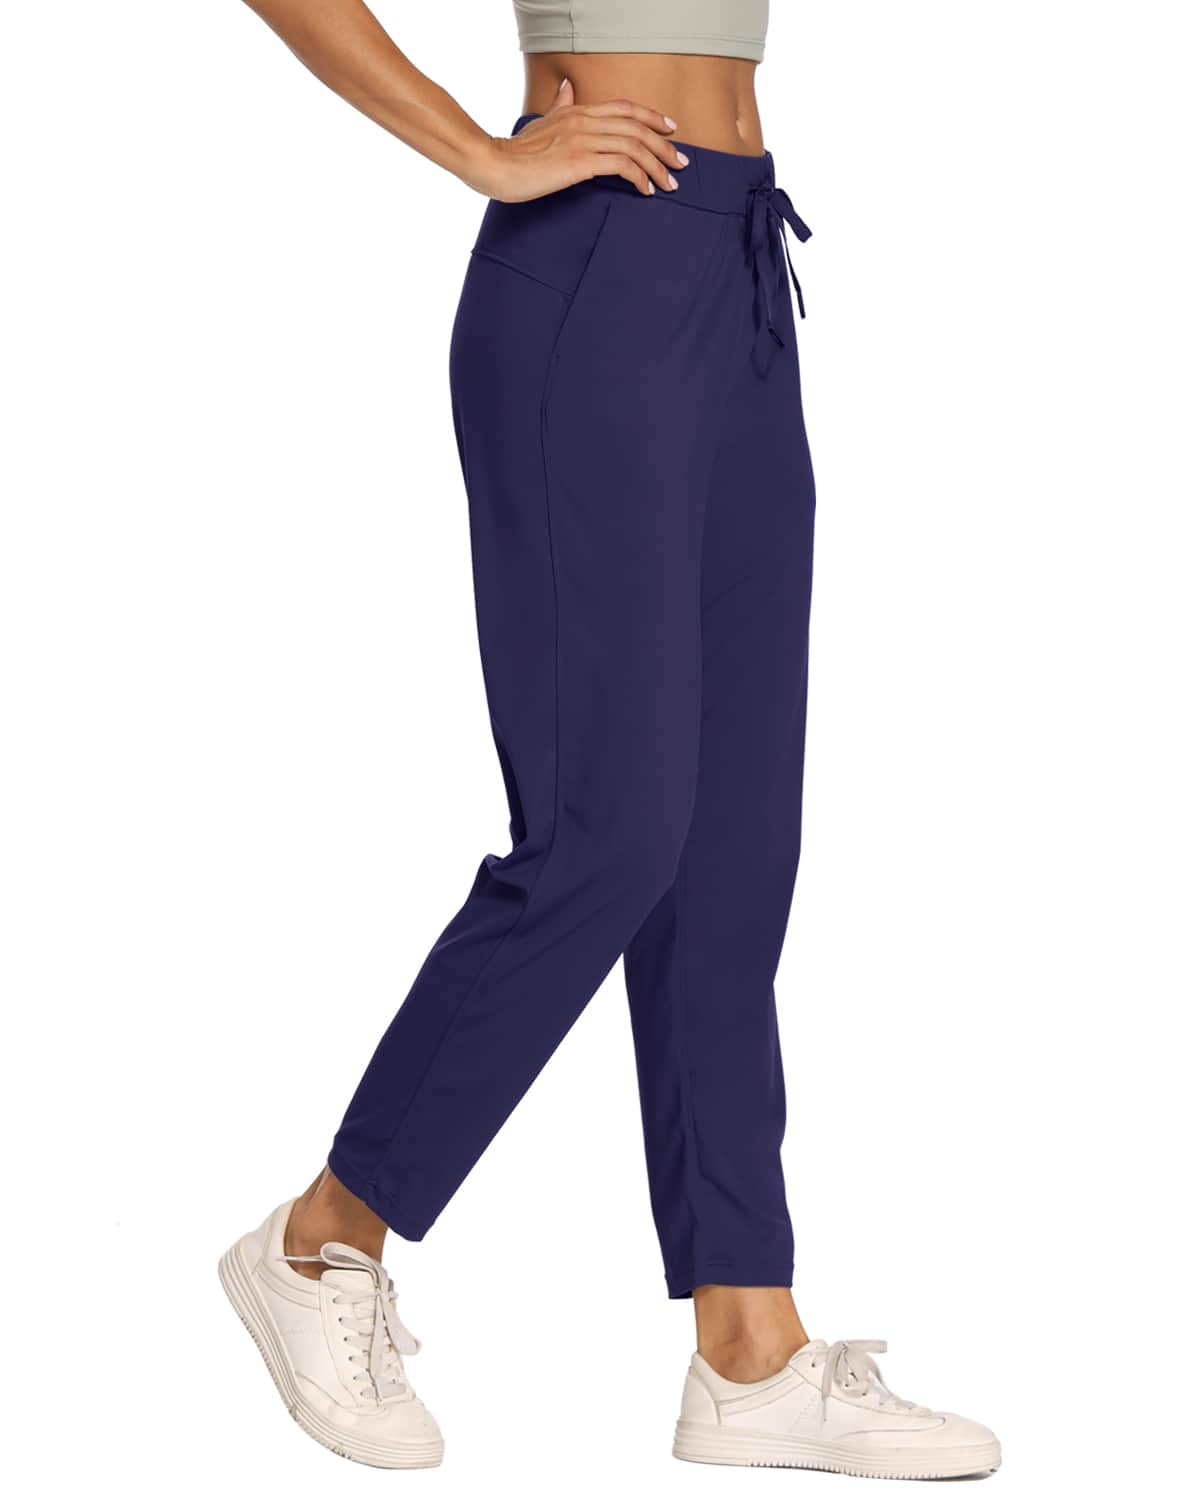 Women's Casual Stretch Pants 7/8 Length